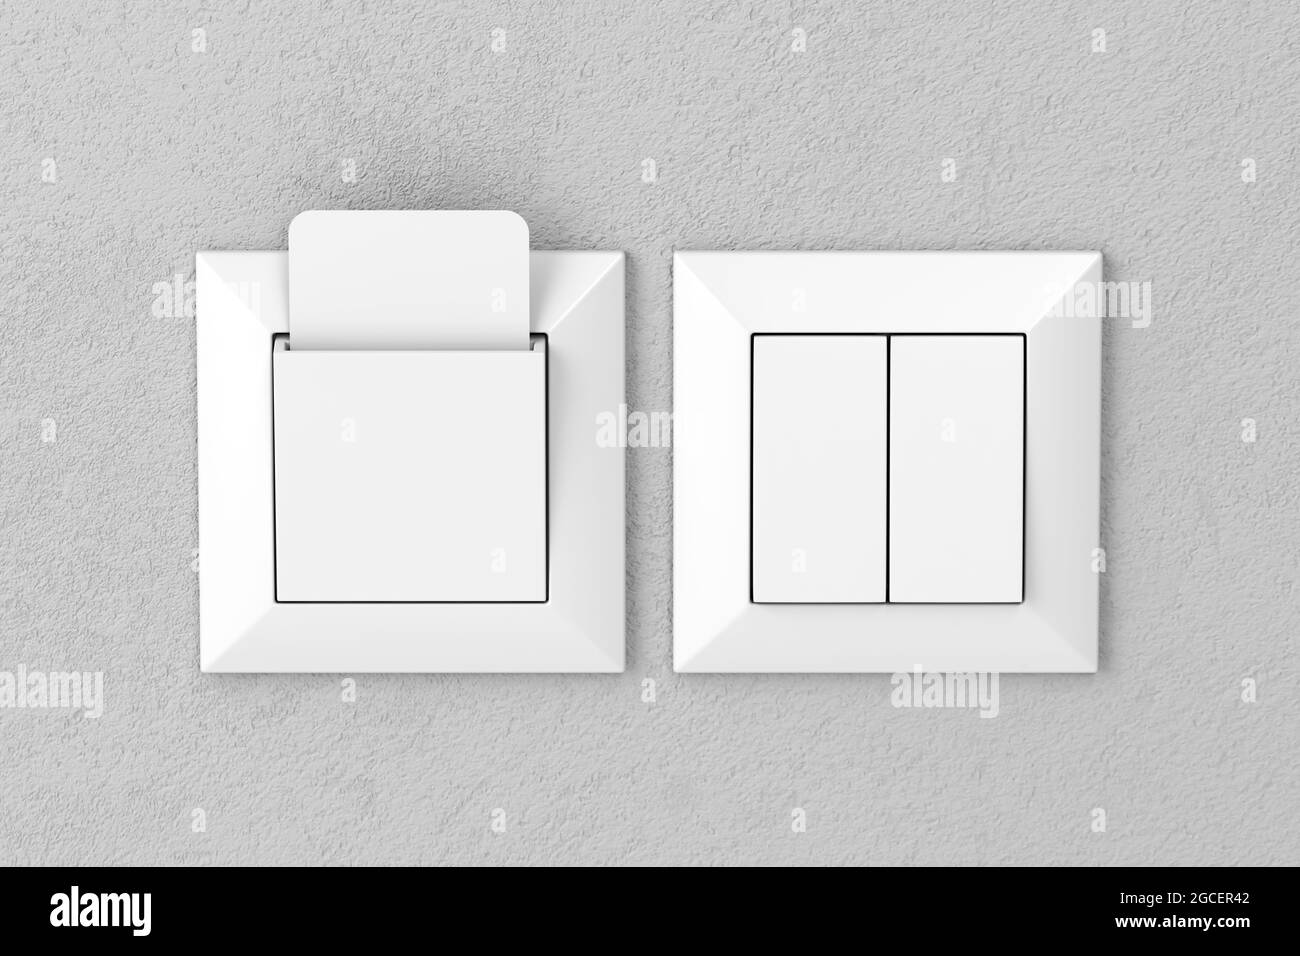 Key card reader and light switches in hotel room, front view Stock Photo